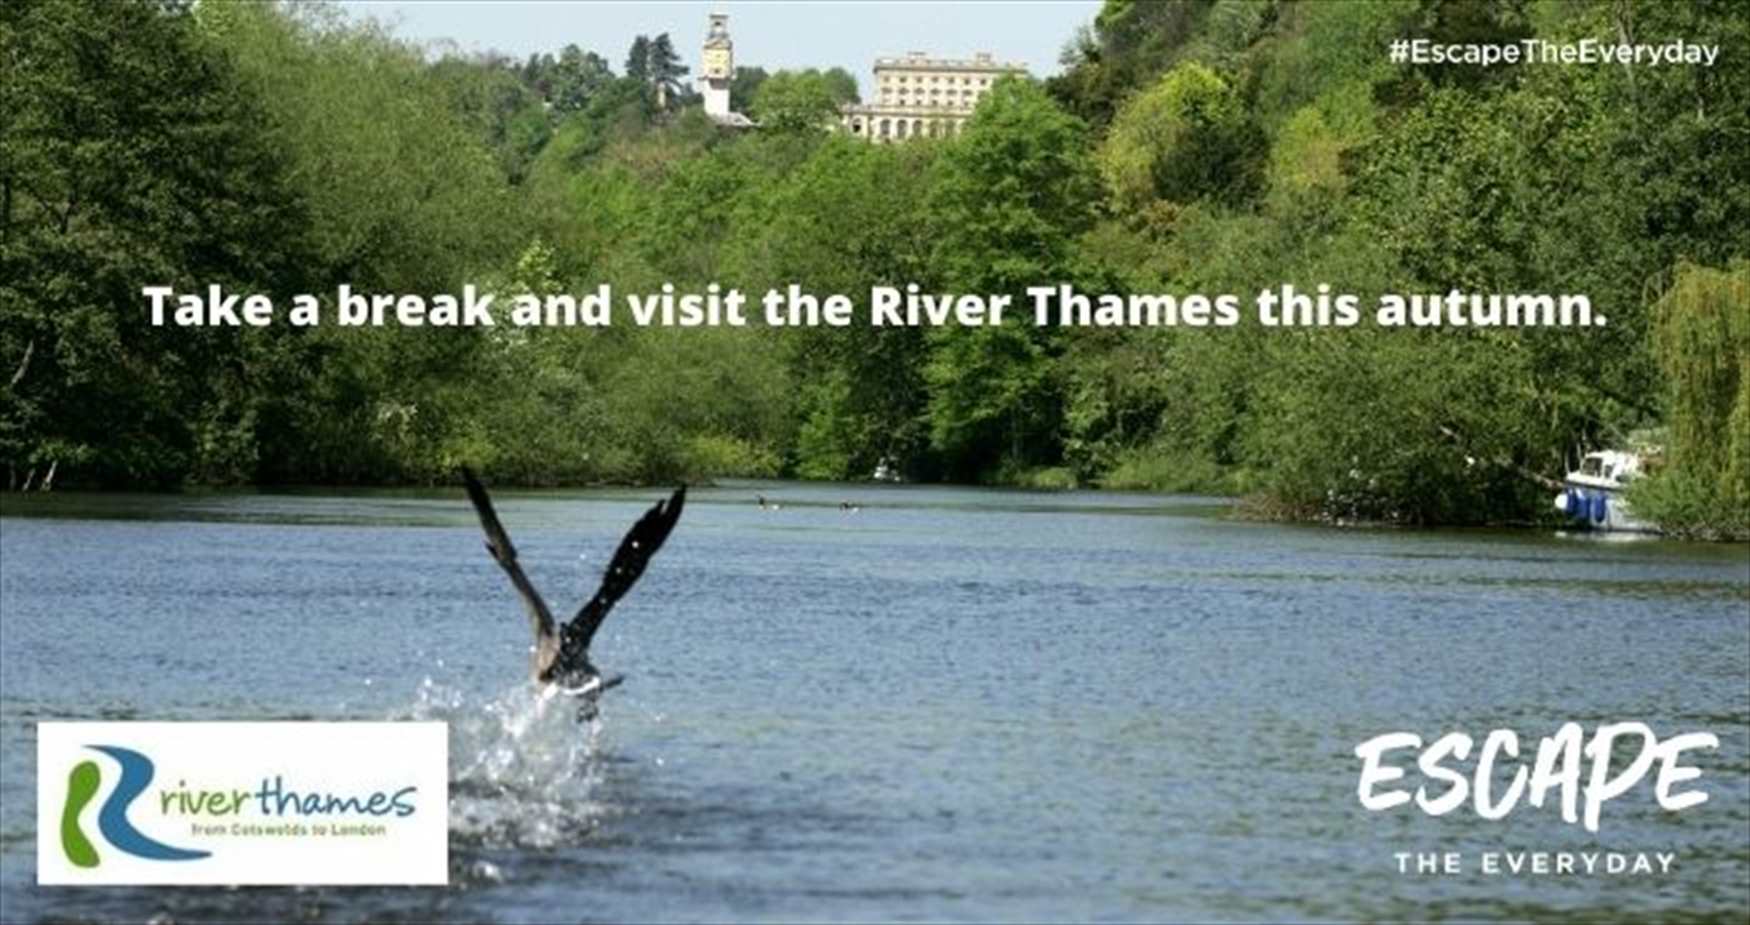 The River Thames at Cliveden - Escape the Everyday - book an Autumn Break